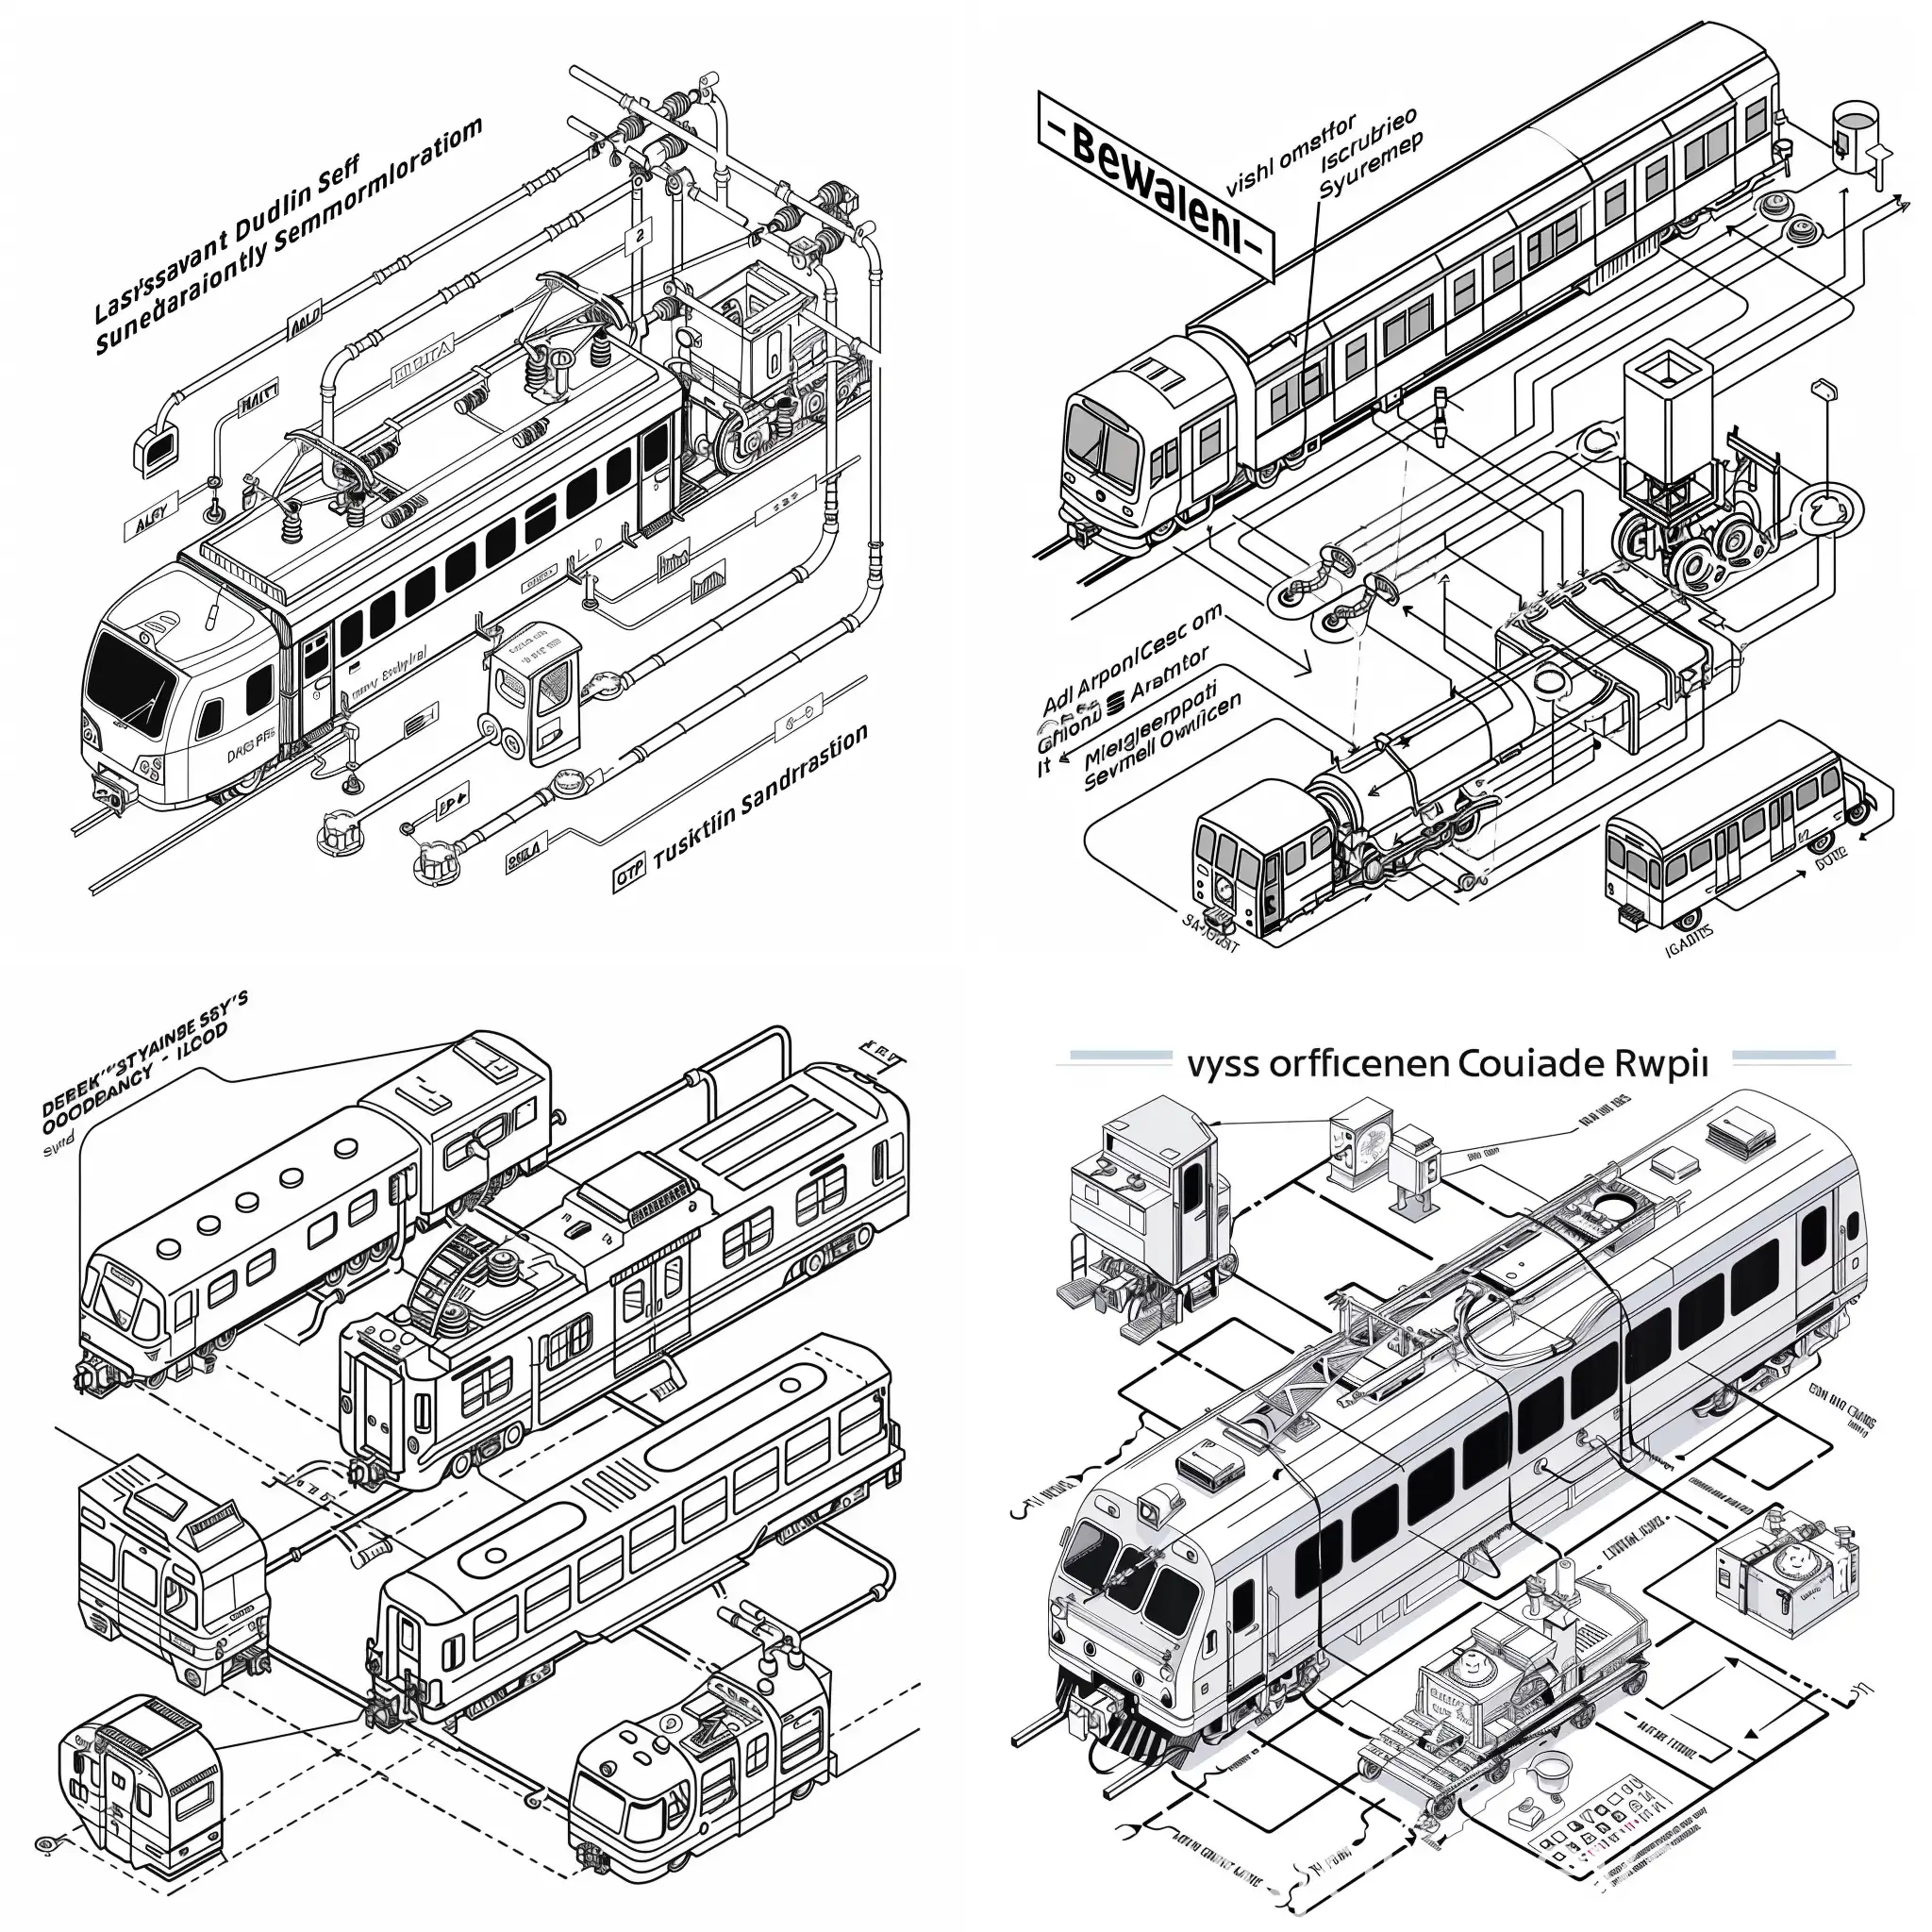 a black and white vector line drawing of system's operation flow, such as the flow chart depicting the visual communication between the driver cabin, train superintendent, rail guard, and train coaches